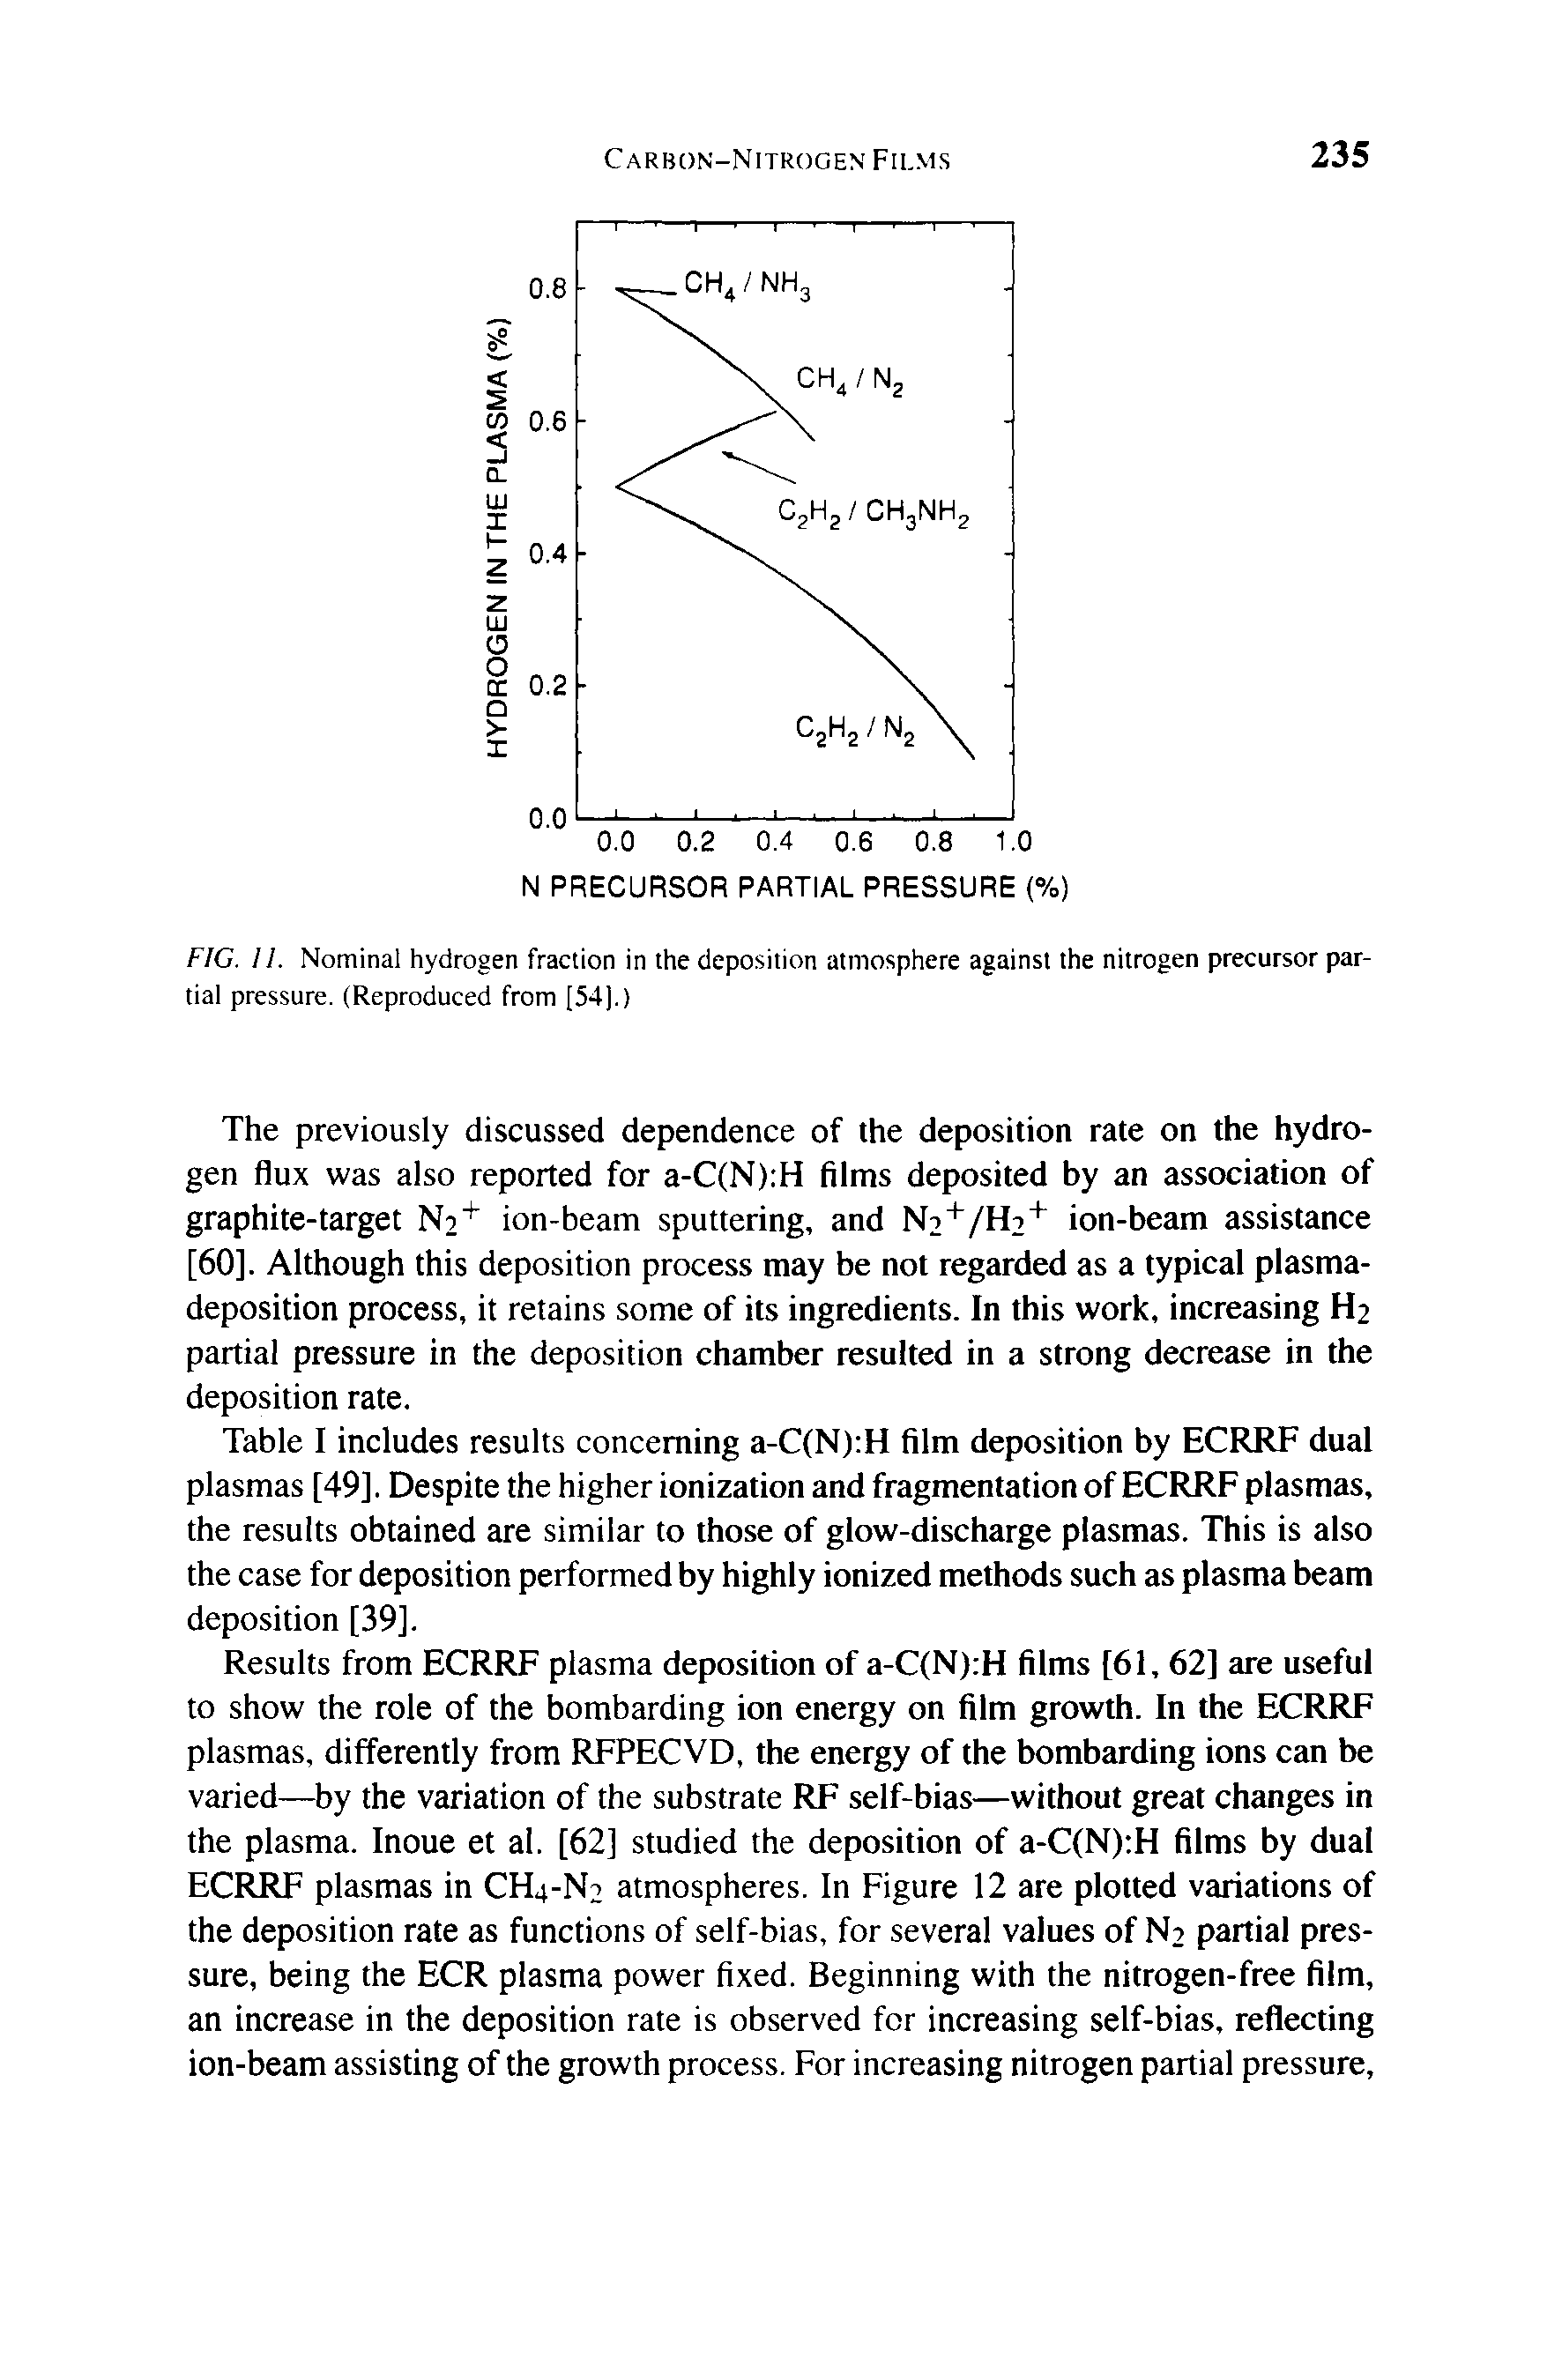 Table I includes results concerning a-C(N) H film deposition by ECRRF dual plasmas [49]. Despite the higher ionization and fragmentation of ECRRF plasmas, the results obtained are similar to those of glow-discharge plasmas. This is also the case for deposition performed by highly ionized methods such as plasma beam deposition [39].